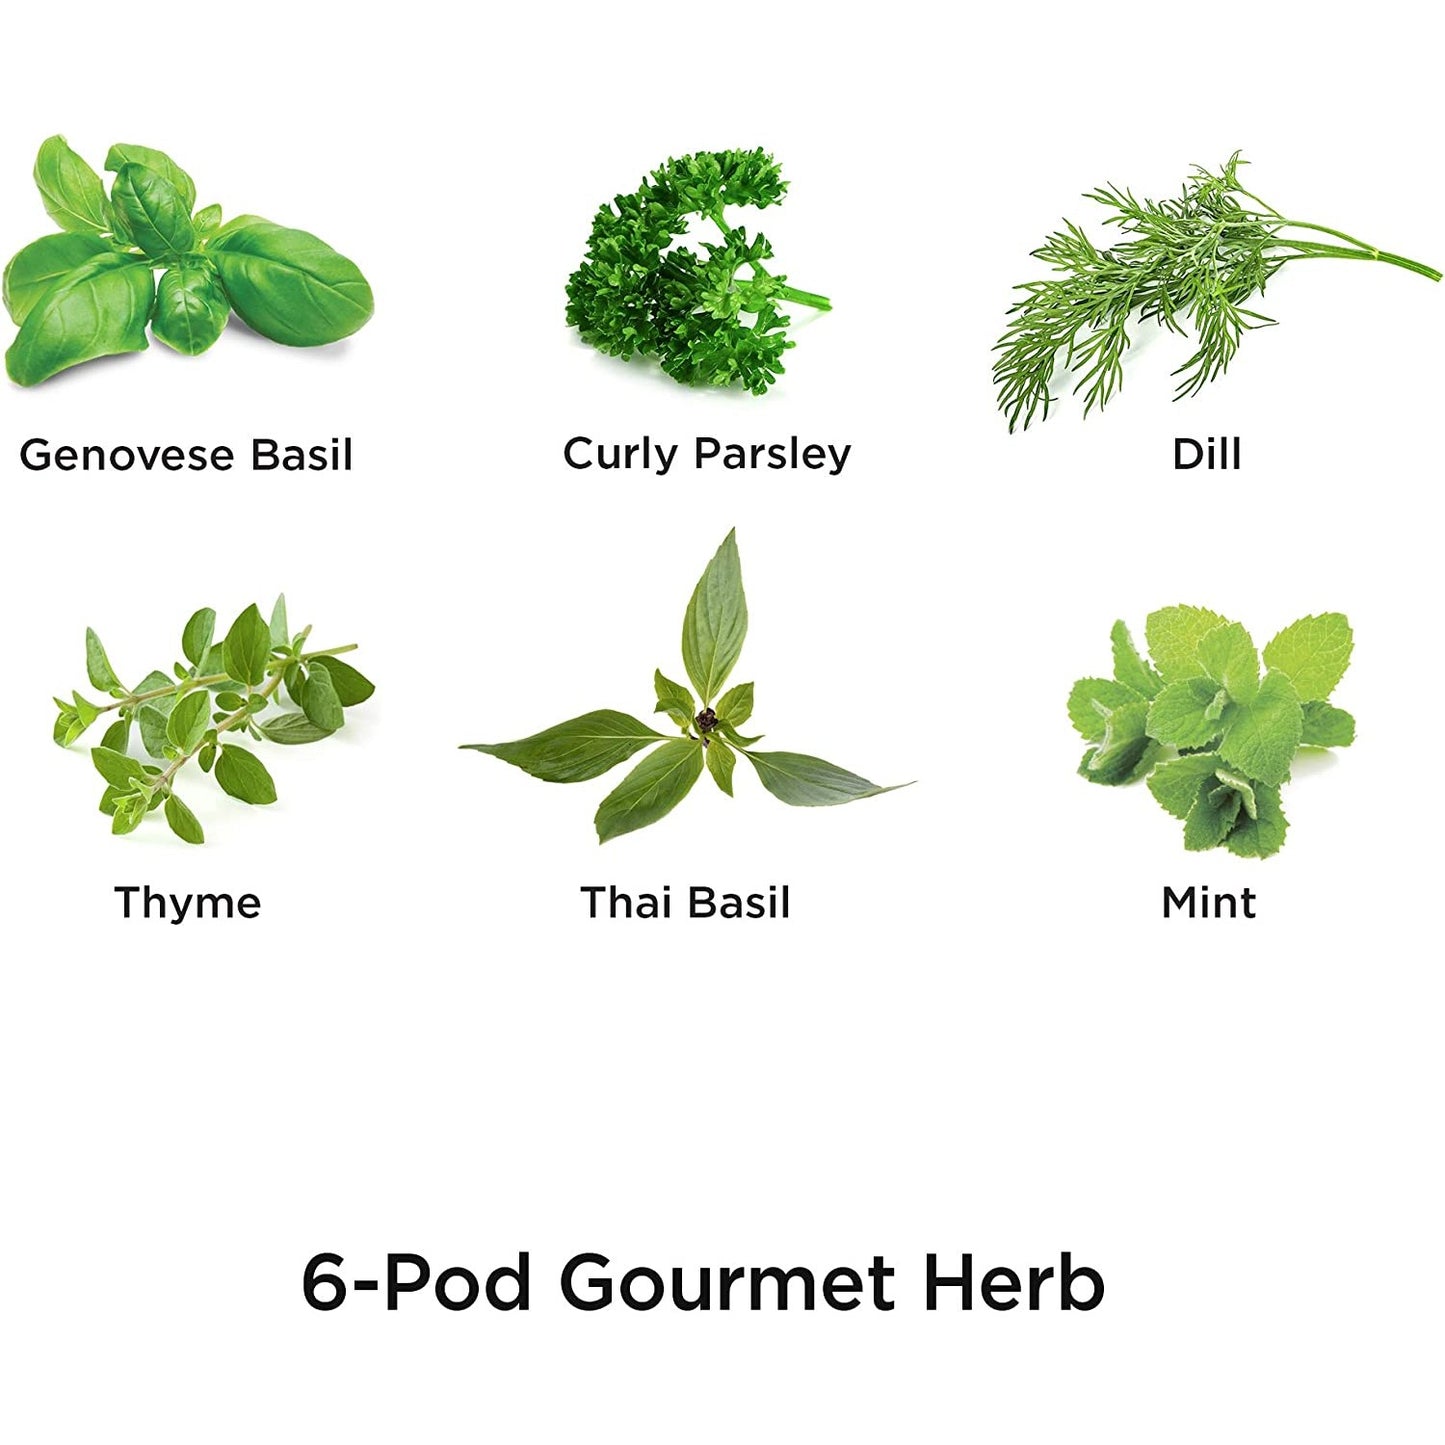 6 various herbs including, Genovese basil, curly parsley, dill, thyme, Thai basil and mint.